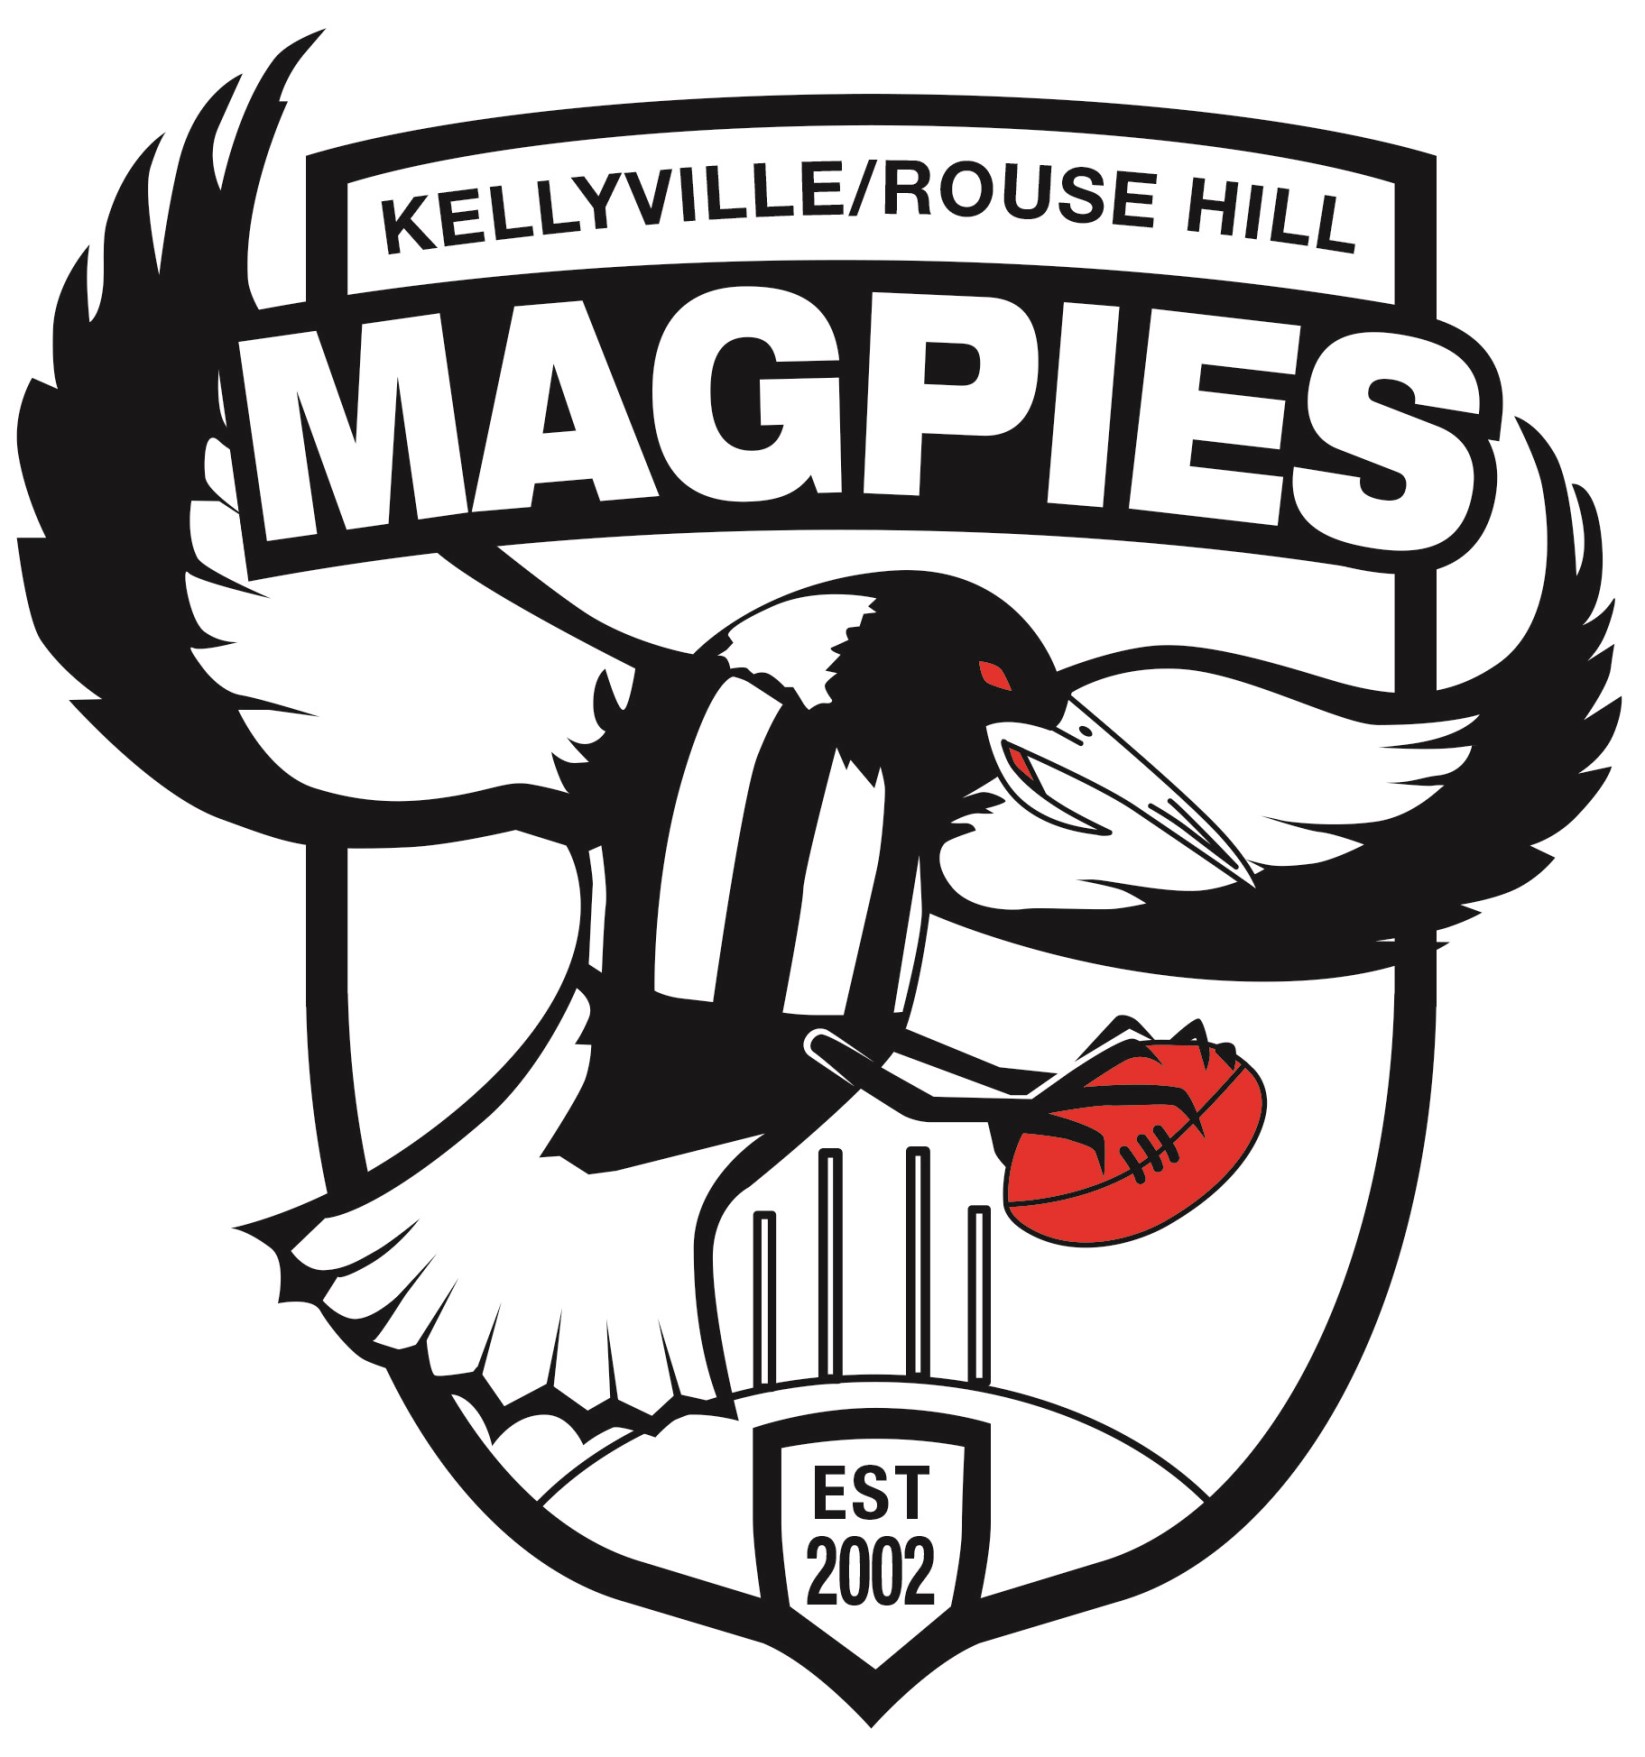 Kellyville Rouse Hill Magpies